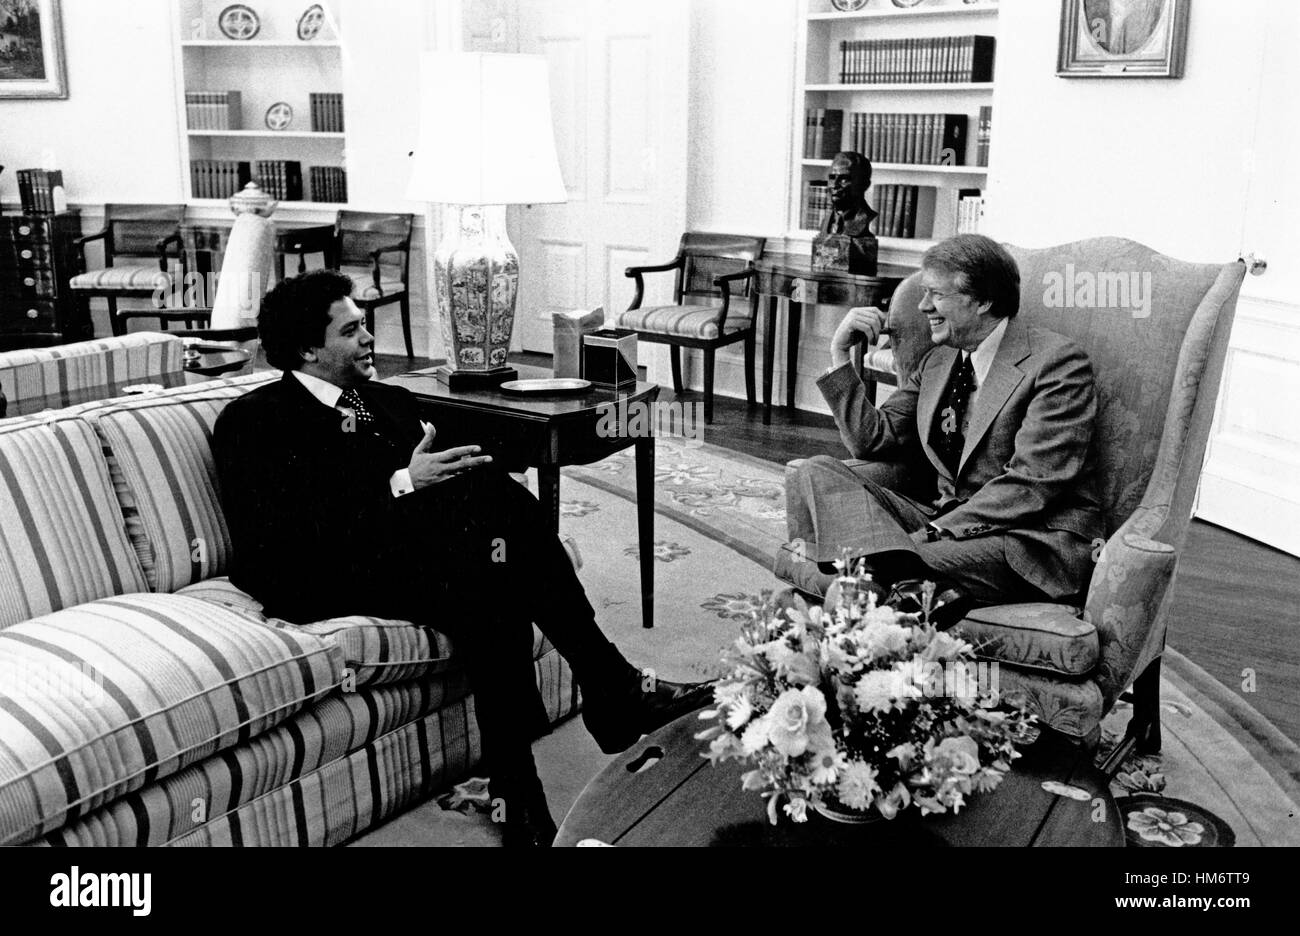 United States President Jimmy Carter, right, meets with Maynard Jackson (Democrat of Atlanta, Georgia) in the Oval Office of the White House in Washington, DC on February 1, 1977. Stock Photo